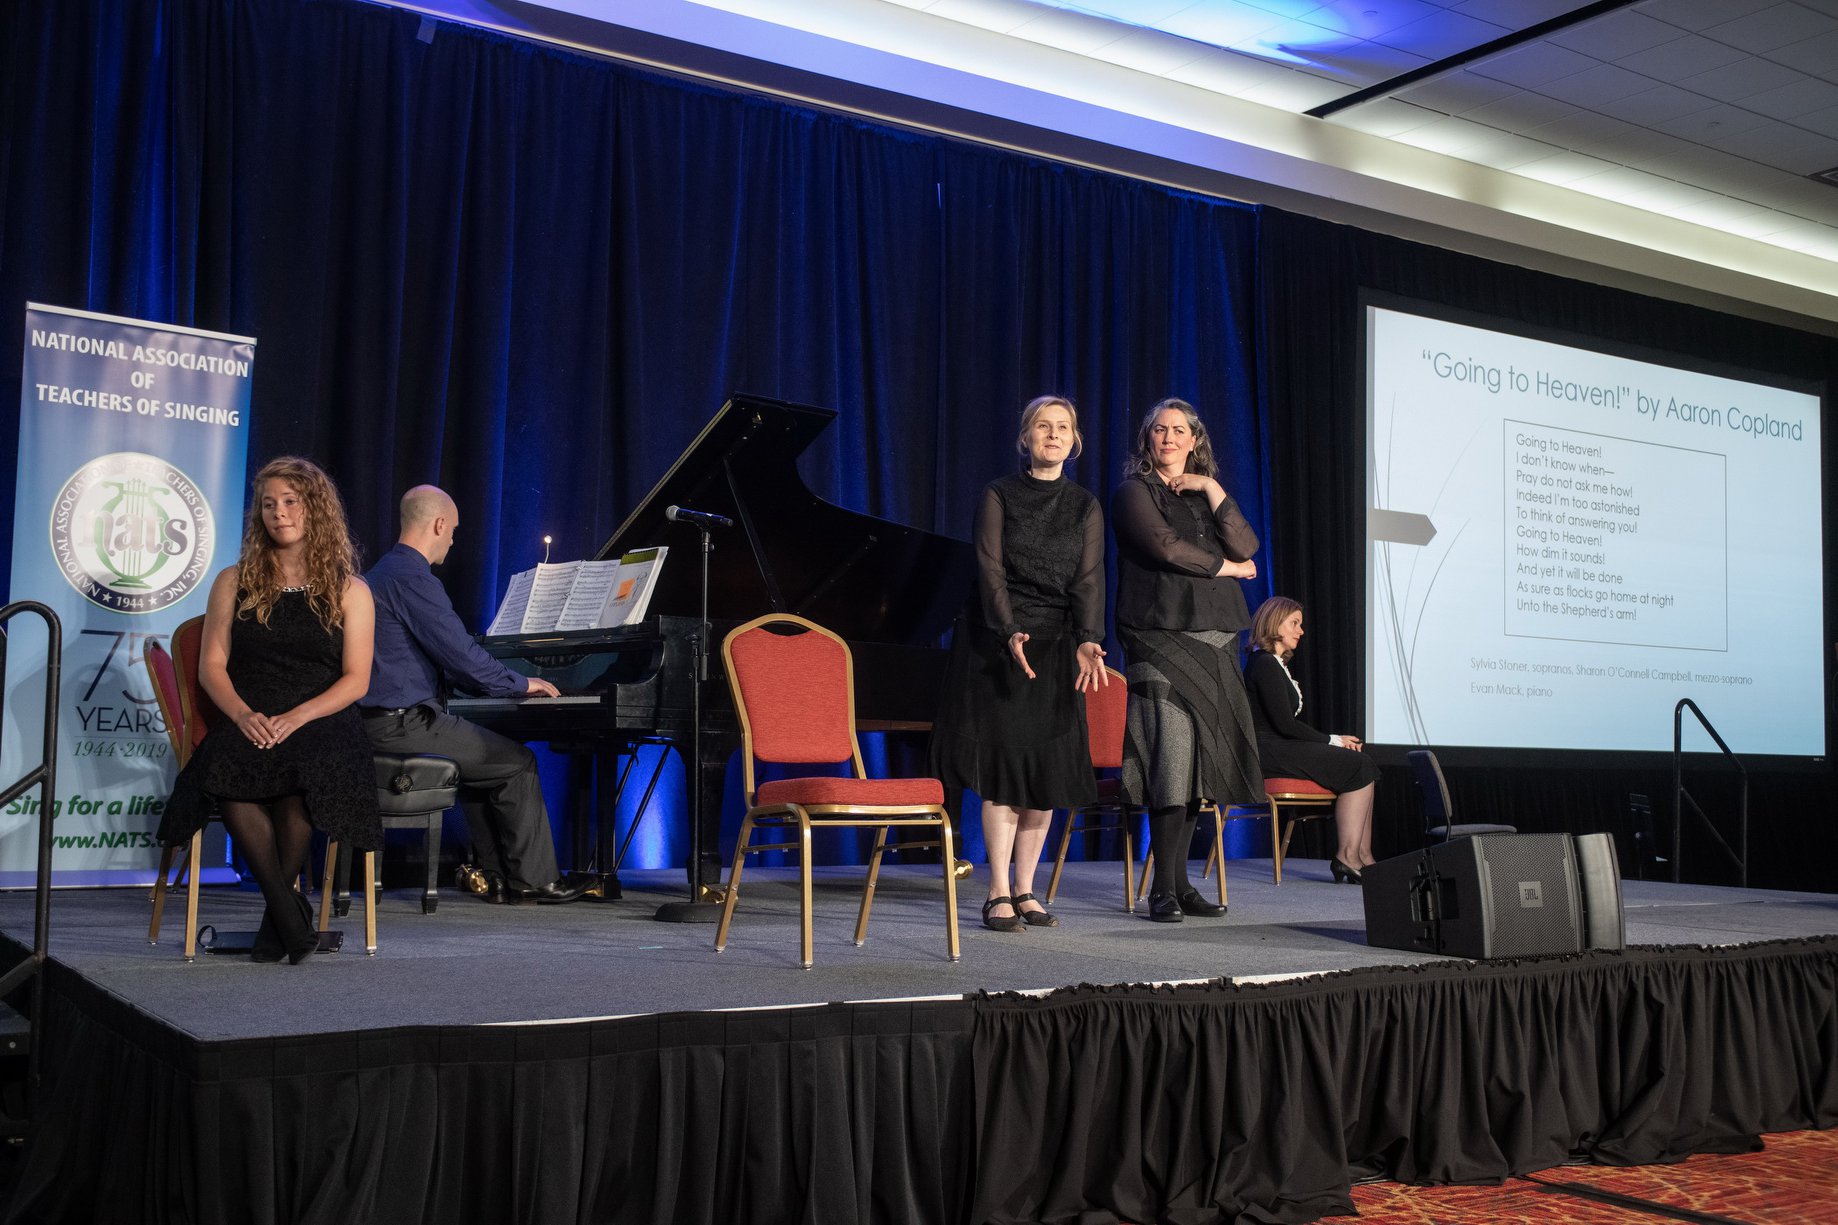 National Association of Teachers of Singing National Conference, Las Vegas, Nevada, 2018 “Transforming Art Song into Music Theatre: Sister – Show Me Eternity: The Creative Process.” Co-Presenters: Anne Jennifer Nash, Sharon O’Connell Campbell, Evan Mack.